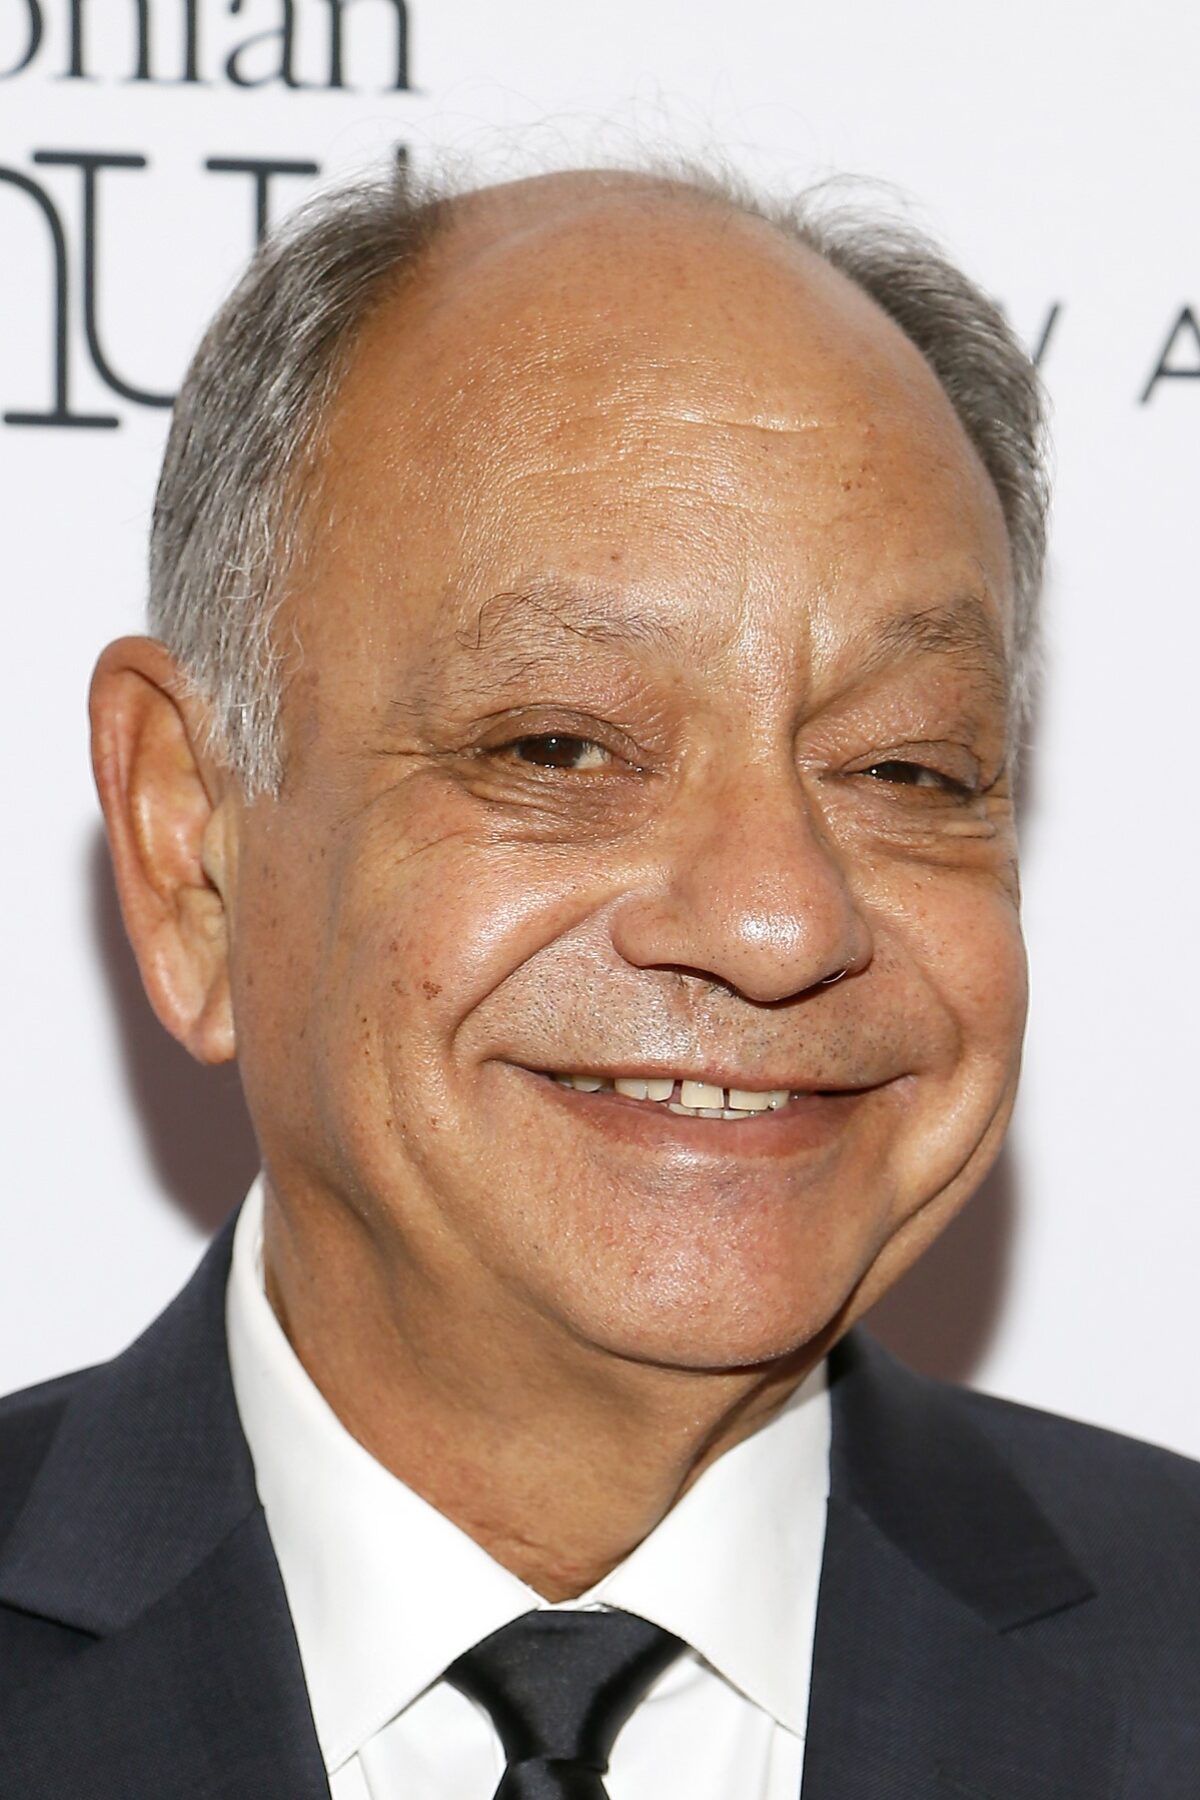 WASHINGTON, DC - DECEMBER 05: Actor Cheech Marin arrives at the Smithsonian Magazine's 2018 American Ingenuity Awards at National Portrait Gallery on December 05, 2018 in Washington, DC. (Photo by Paul Morigi/Getty Images)